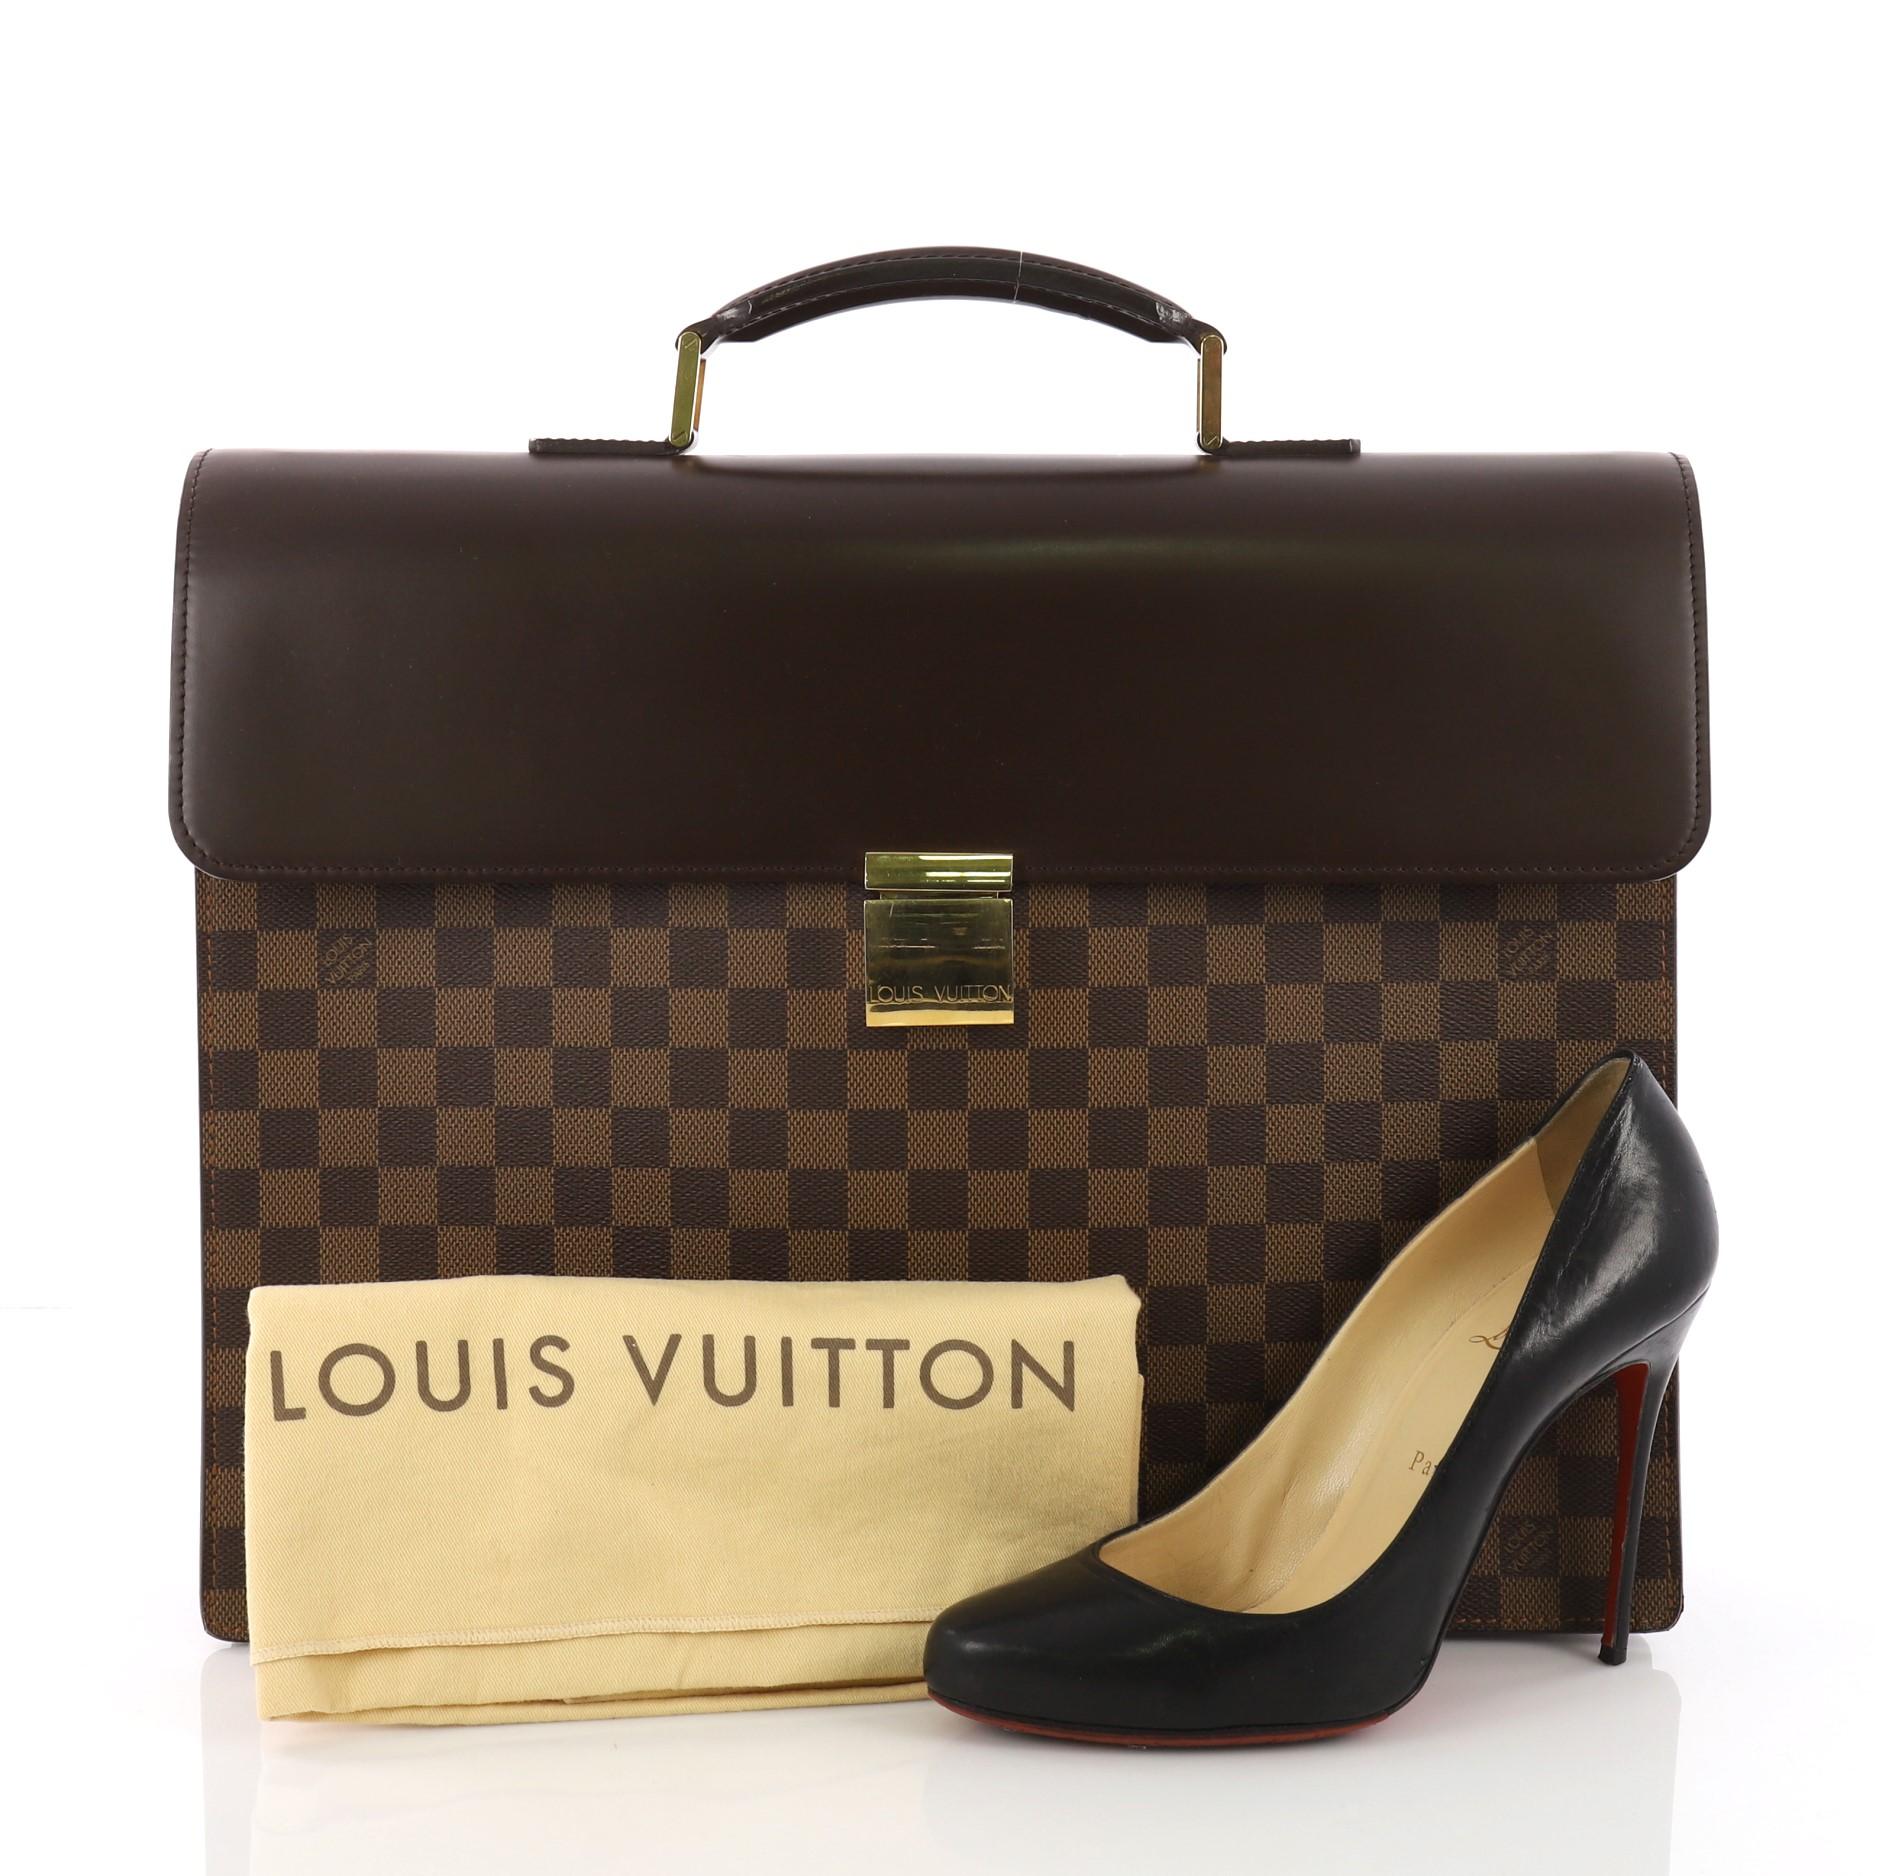 This Louis Vuitton Altona Bag Damier PM, crafted from damier ebene coated canvas, features leather top handle, exterior back slip pocket and gold-tone hardware. Its latch closure opens to a brown microfiber interior with slip pockets. Authenticity